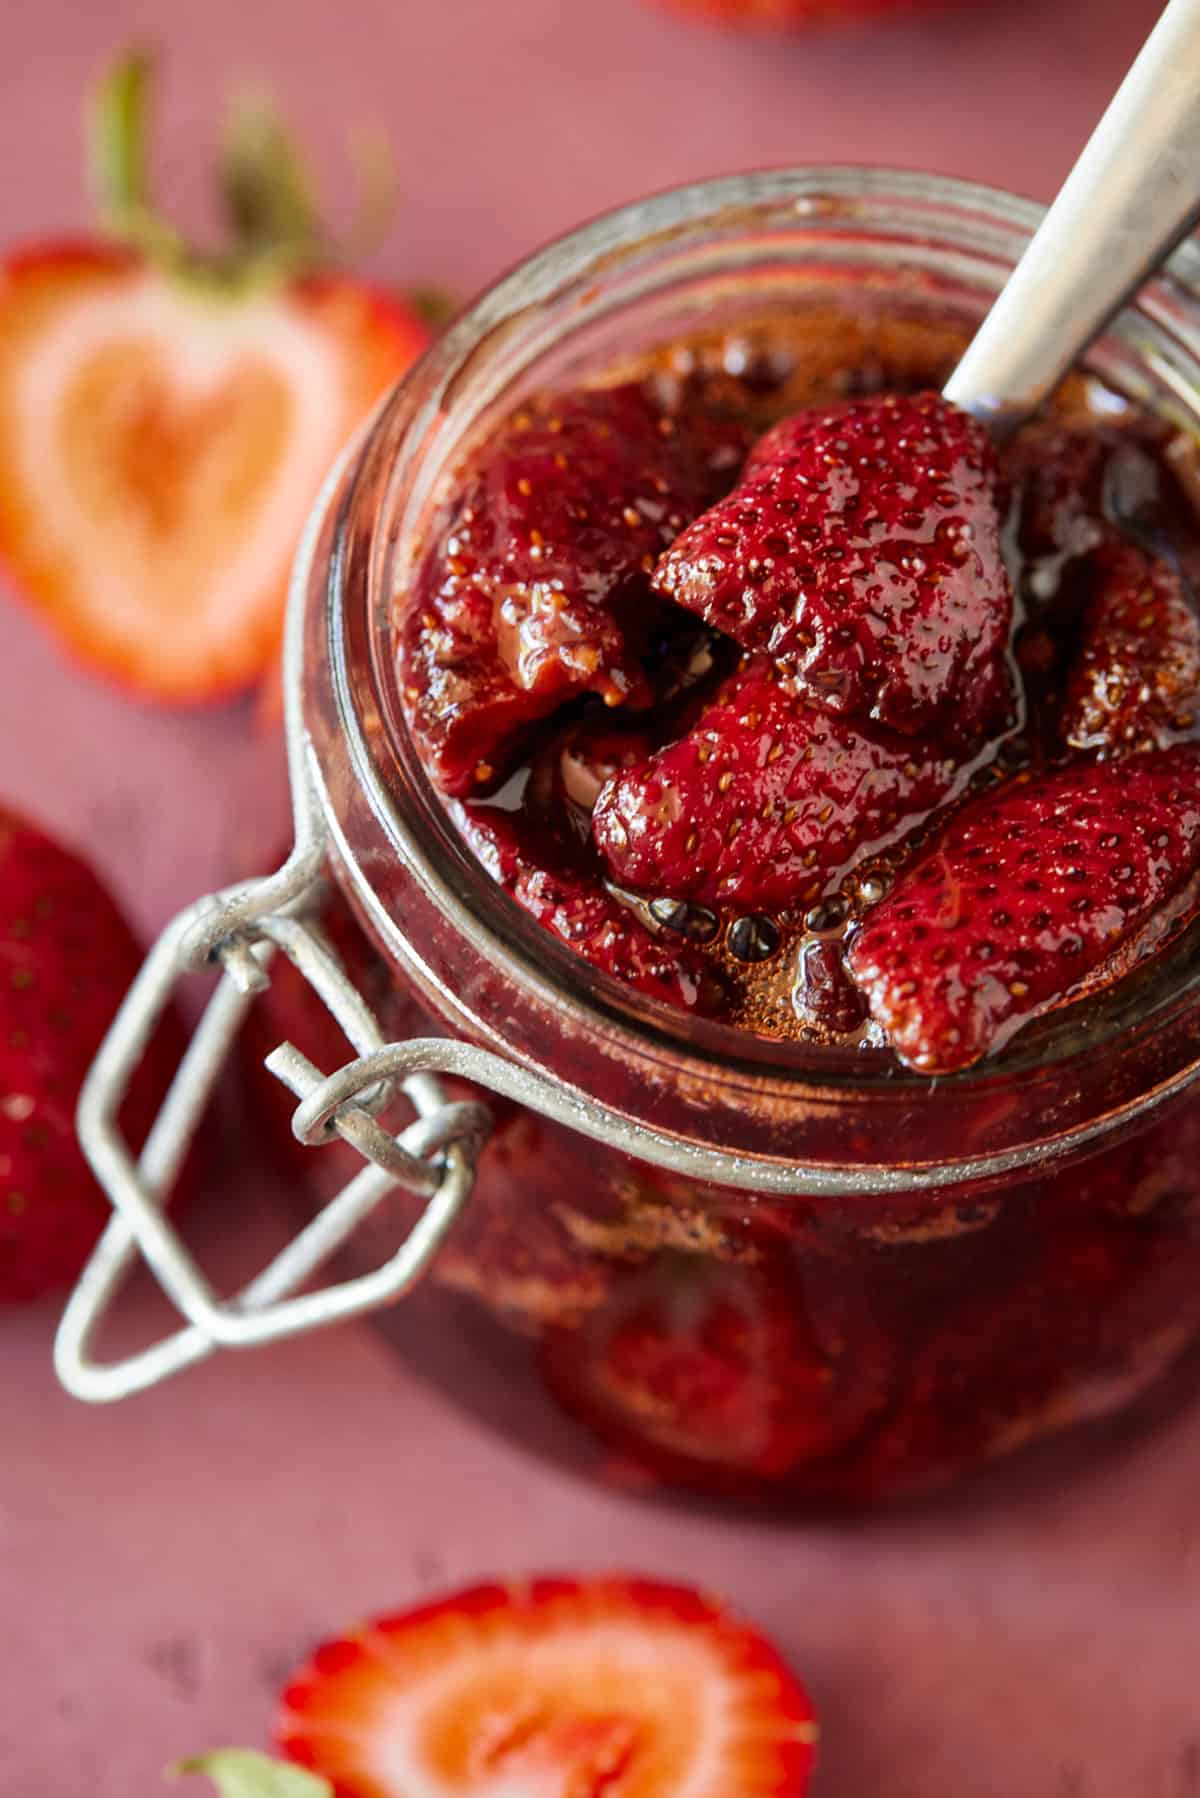 Spoon in glass jar of strawberry sauce. 